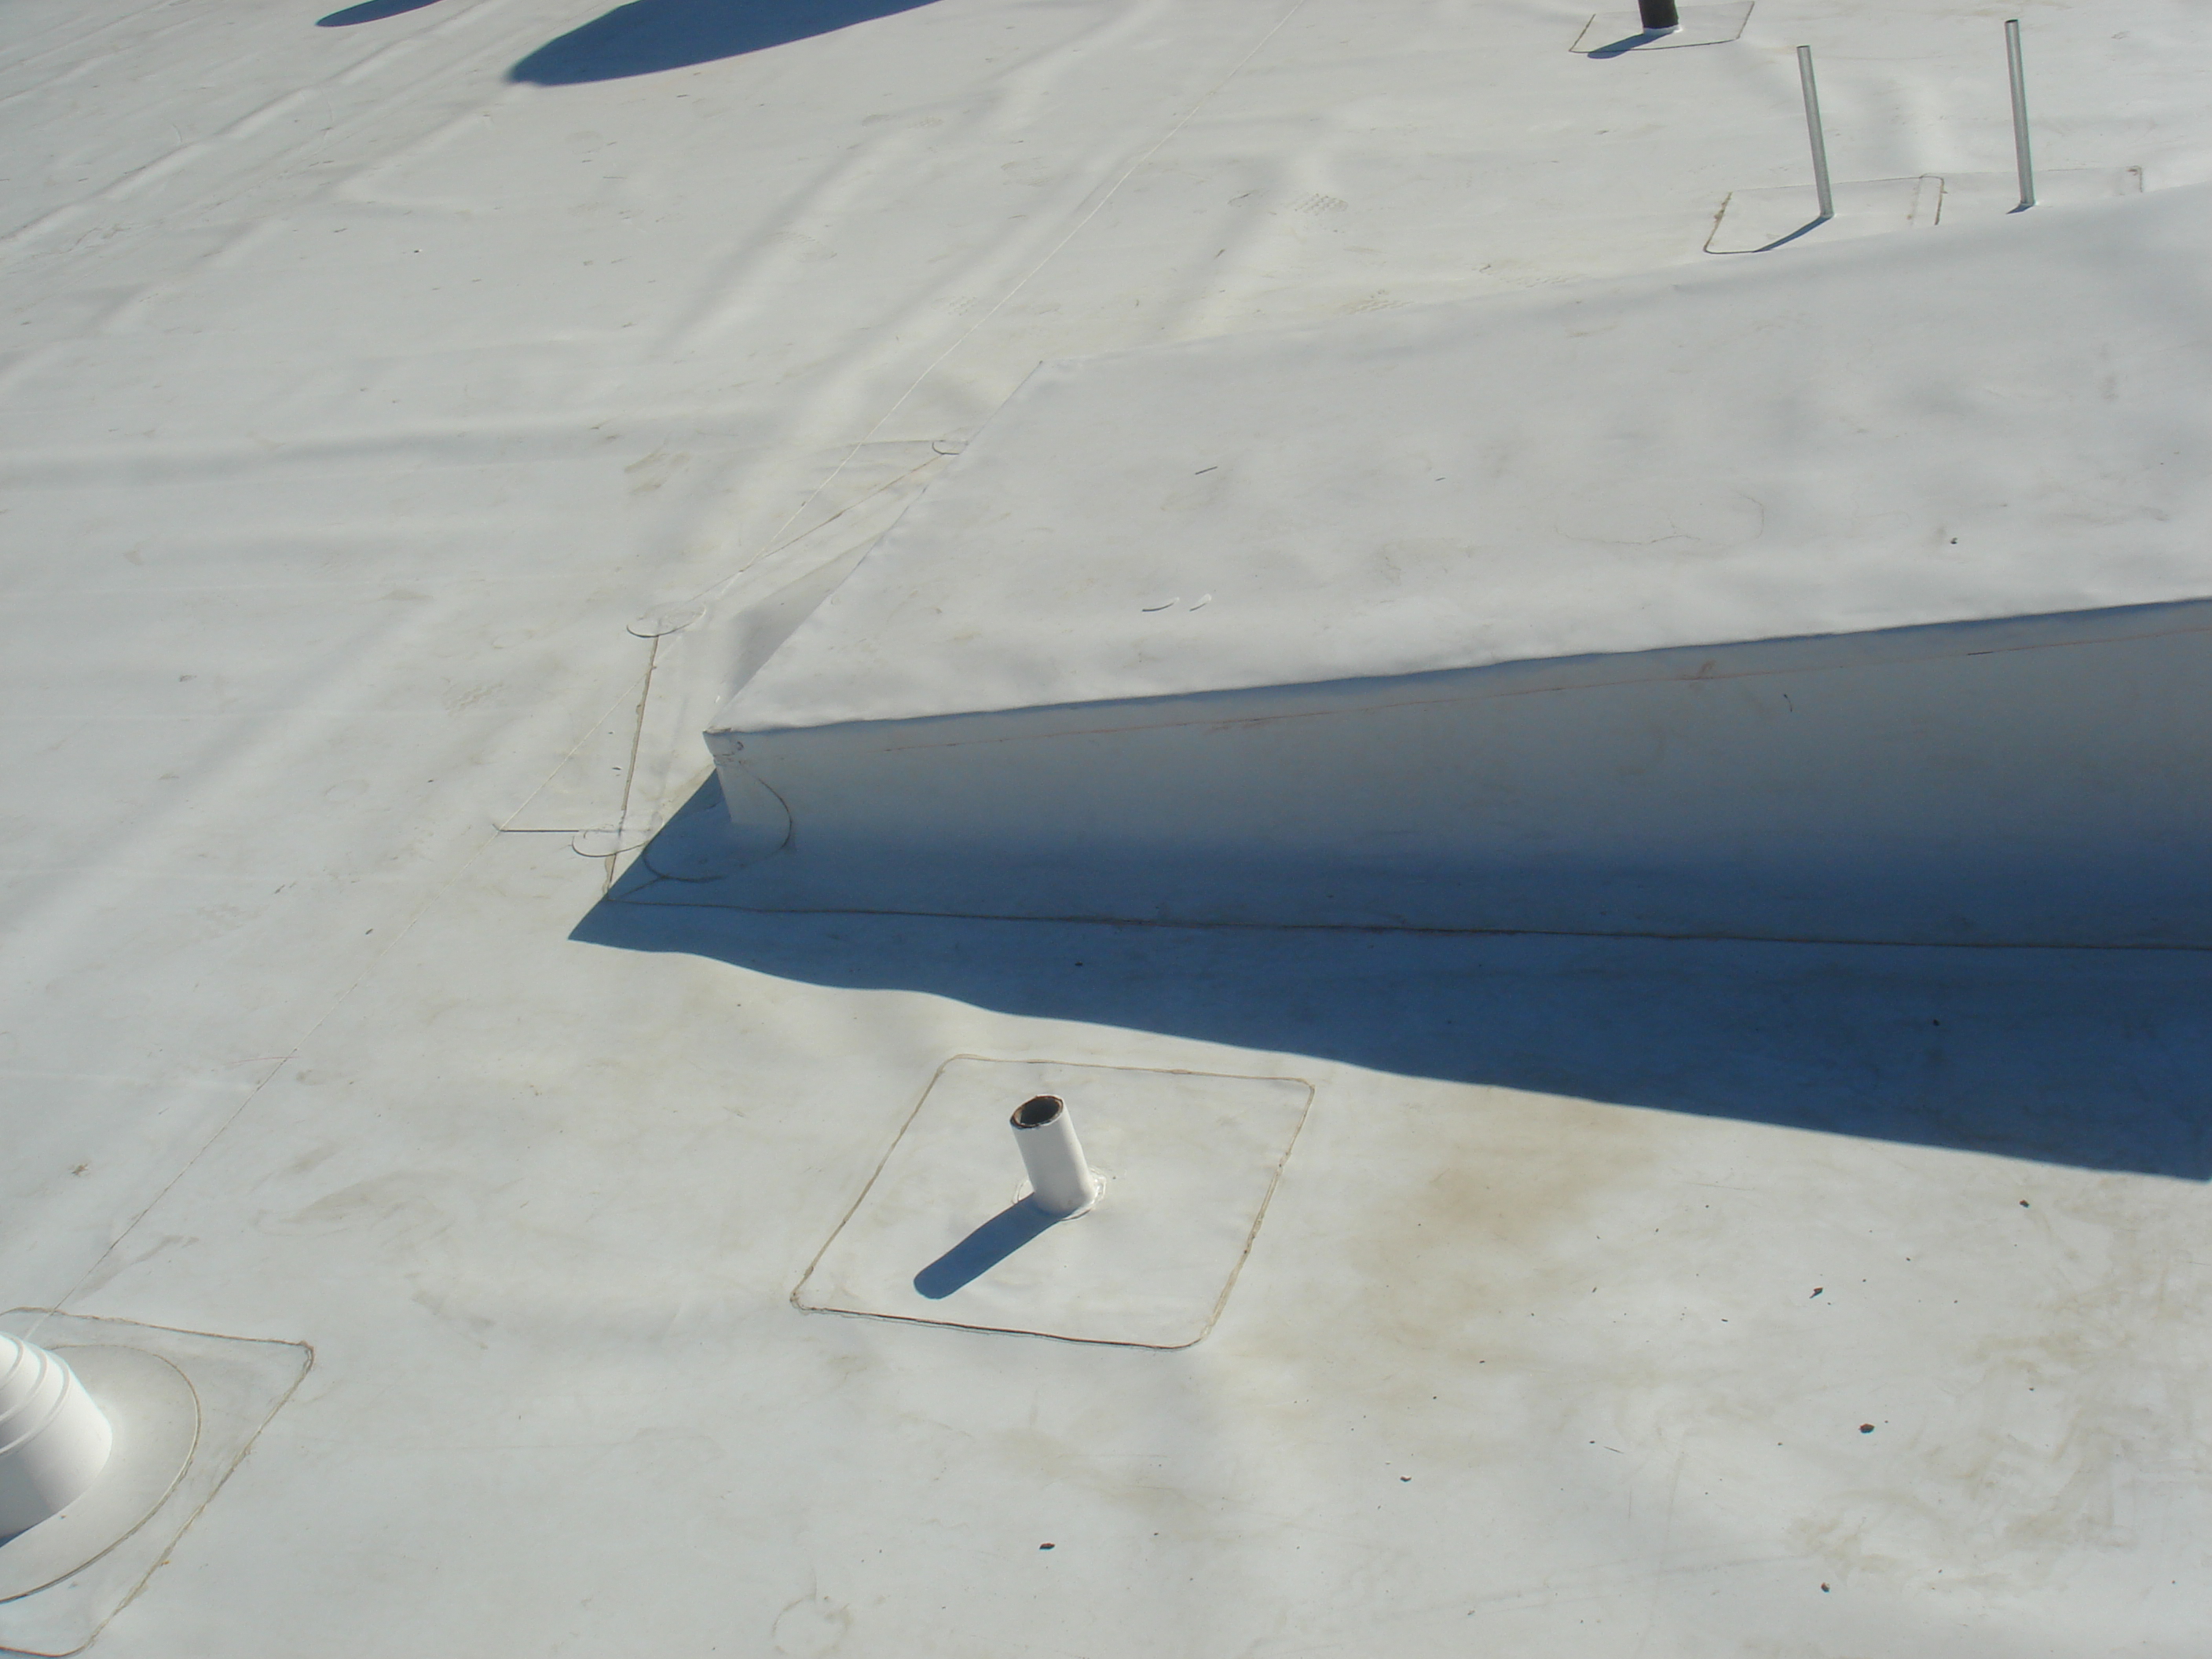 FC and Sons Roofing Protfolio | Commercial and Industrial Roofing in California | Commercial and Industrial Roofing in Nevada | Commercial and Industrial Roofing in Arizona